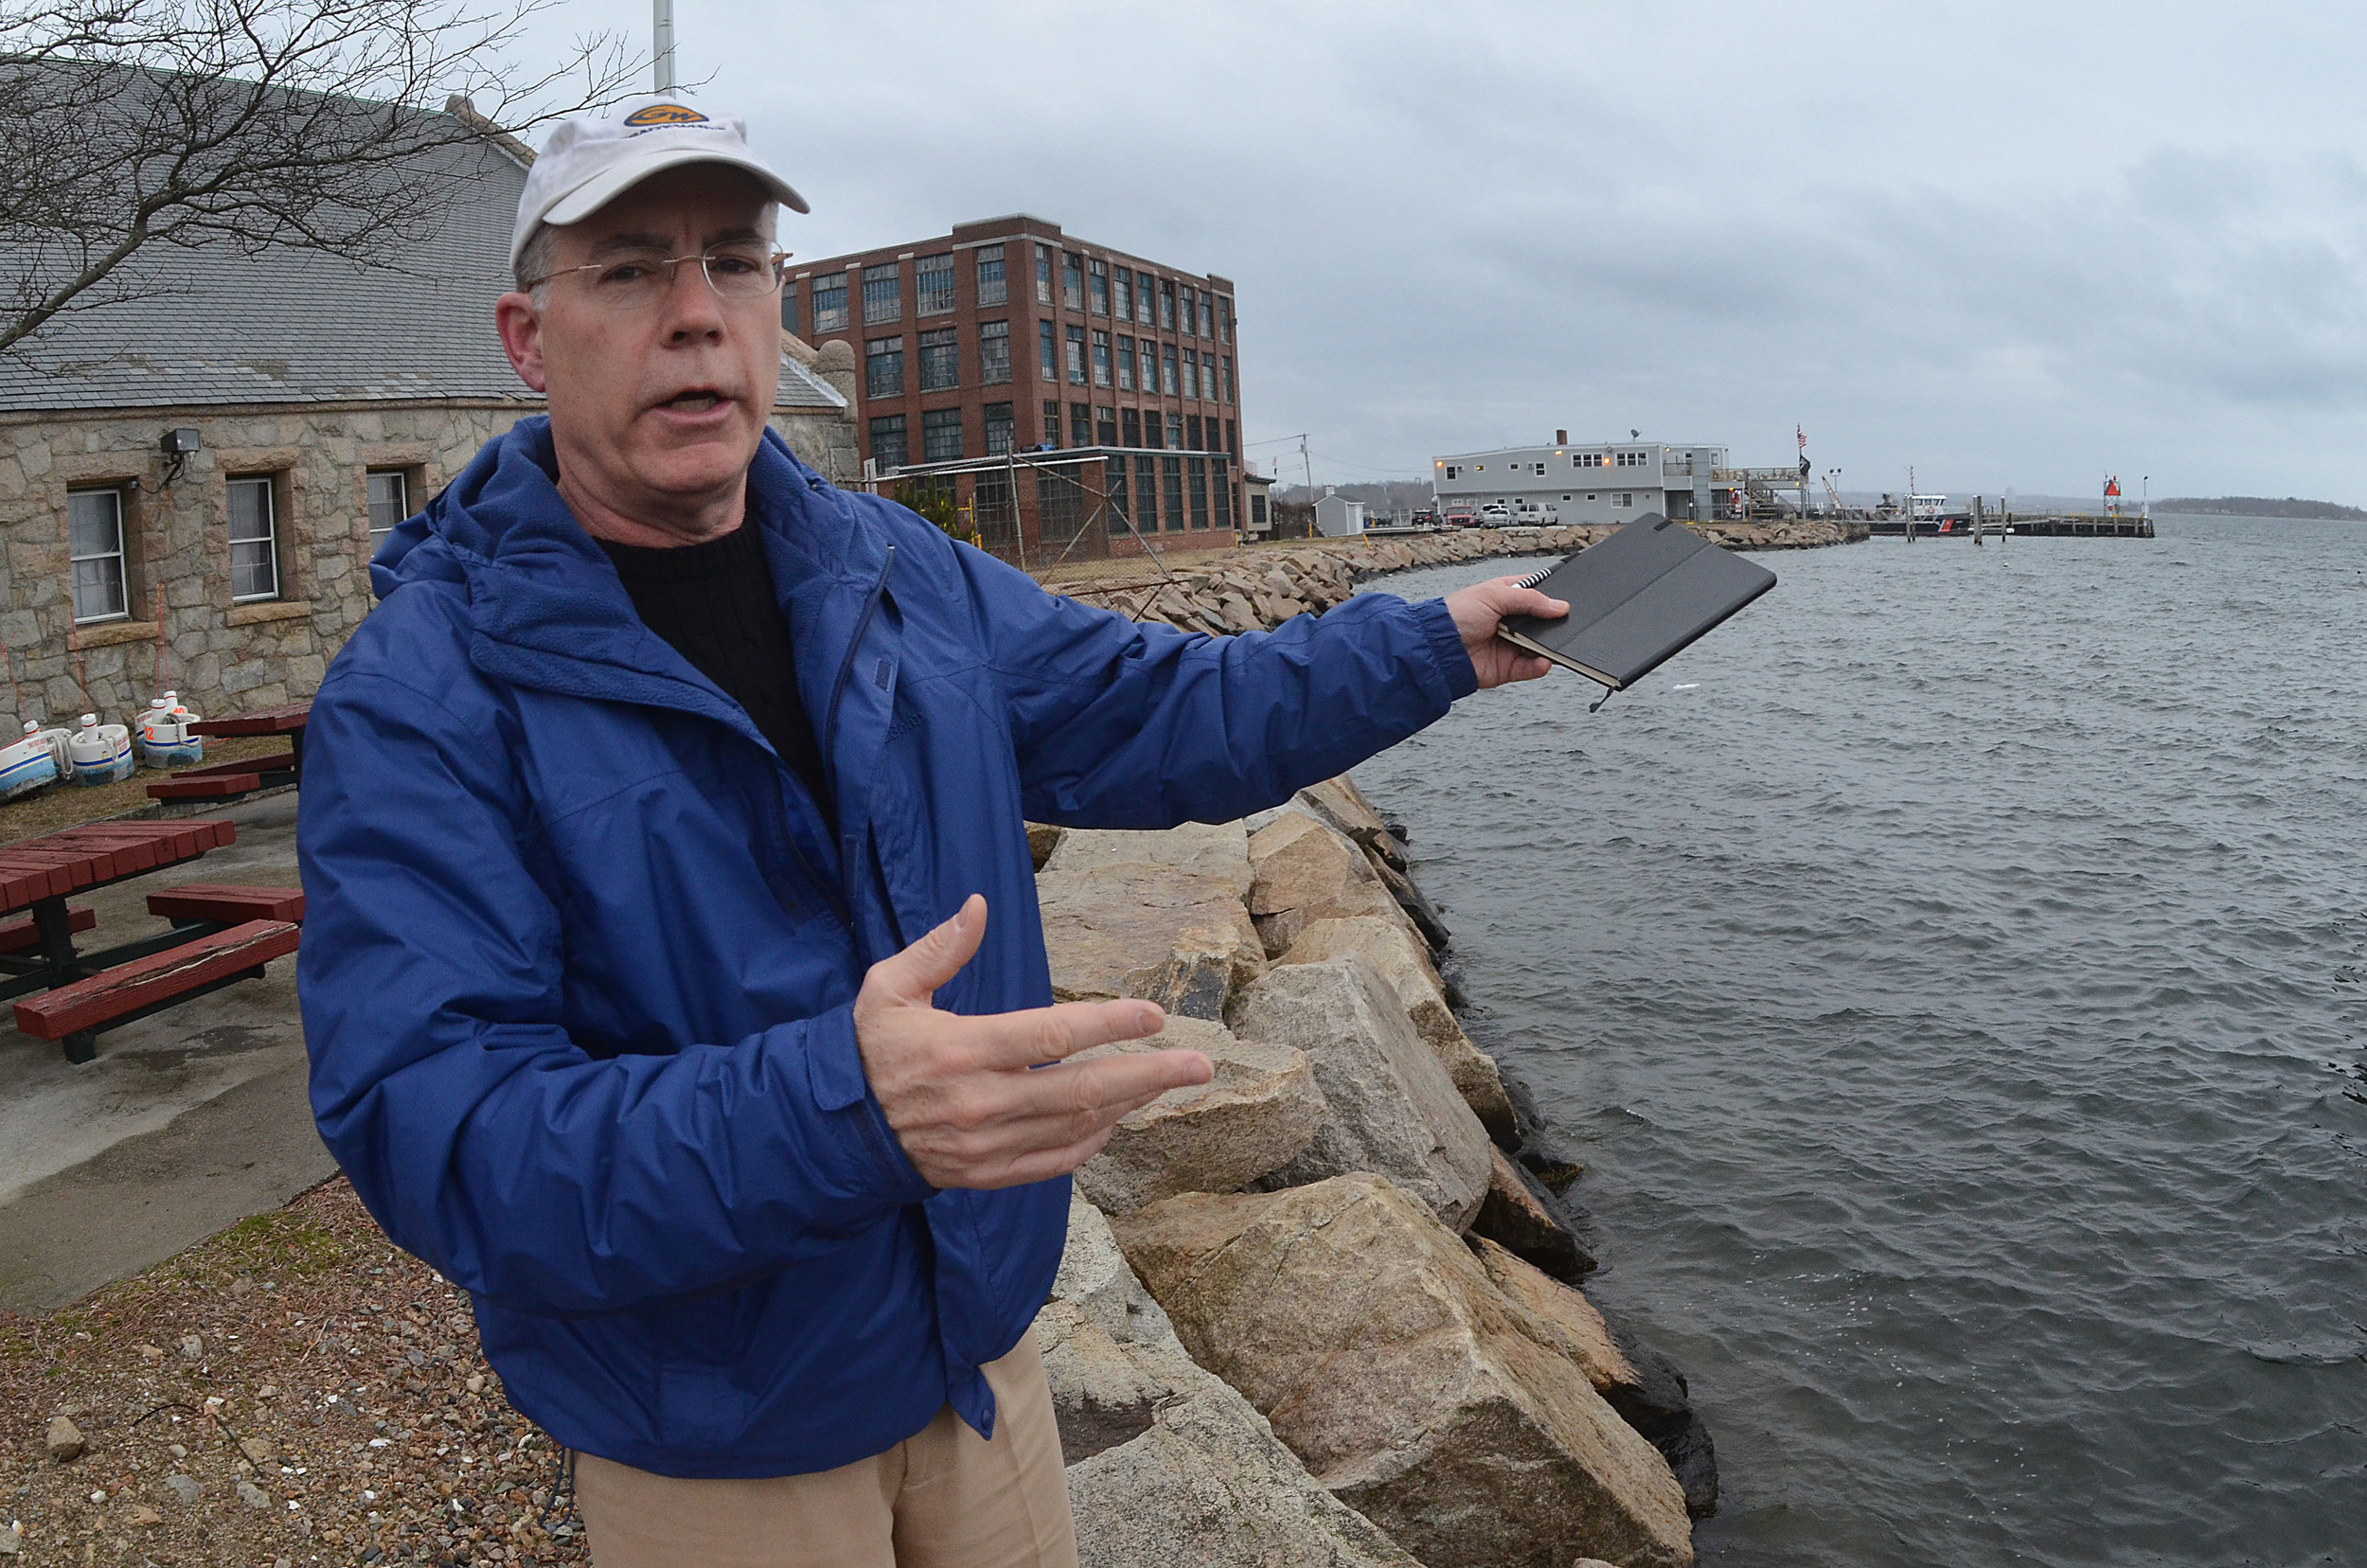 Patrick McCarthy, representing a group of Bristolians on the waiting list for a public boat slip, said it’s unacceptable that the town is delaying plans for a public marina for at least a year.